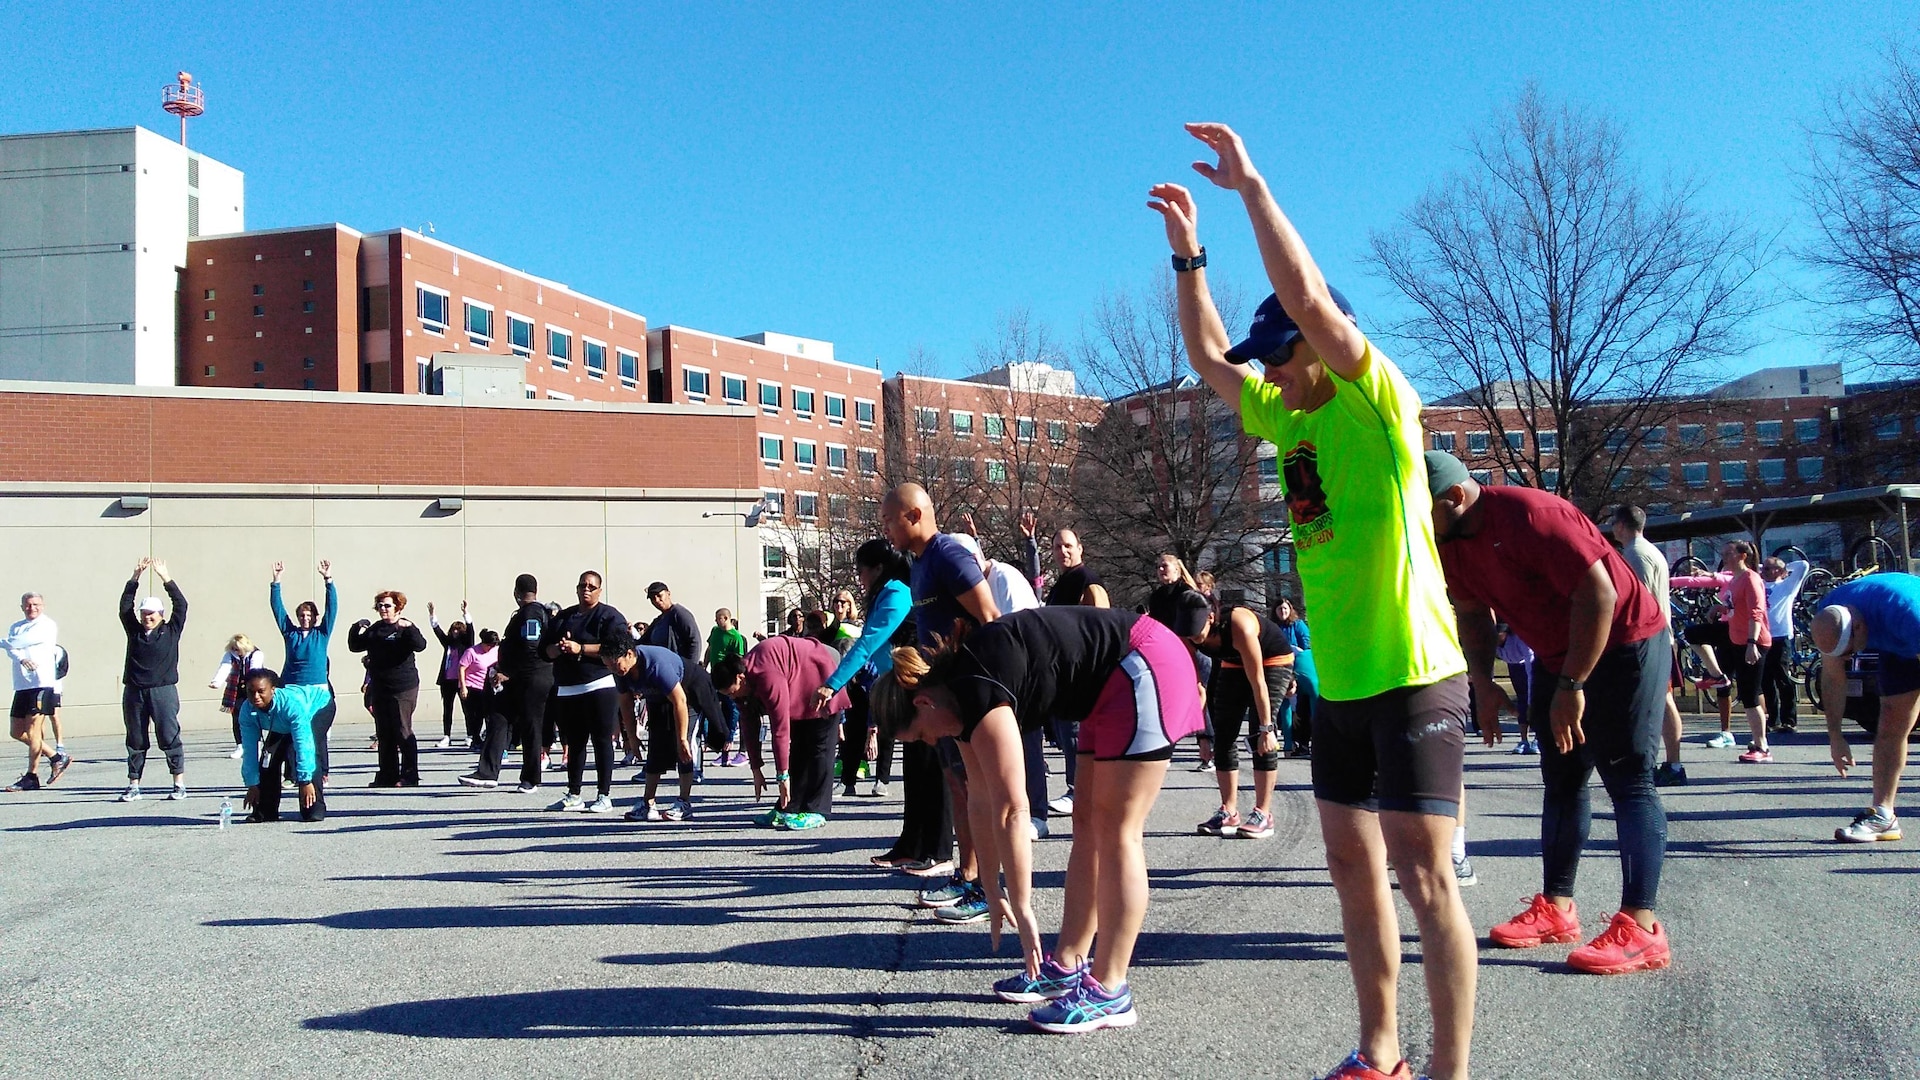 Walkers and runners do warmup exercises before the Frosty Bear walk-run, Jan. 25 at the McNamara Headquarters Complex, Fort Belvoir, Virginia.